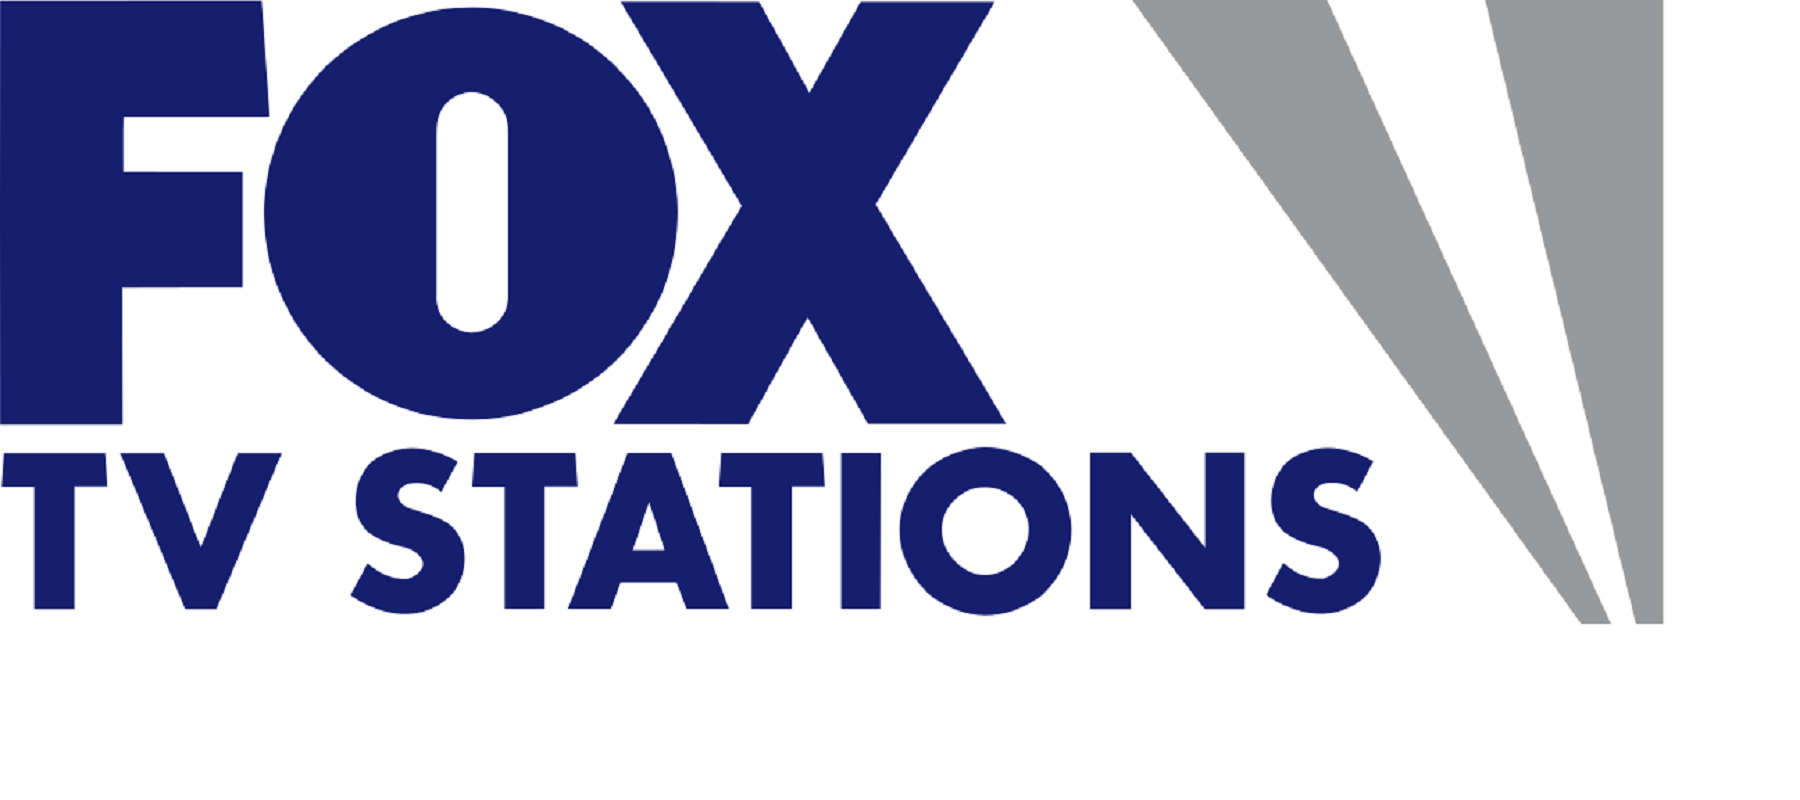 Fox Television Stations announces newly-restructured advertising sales division